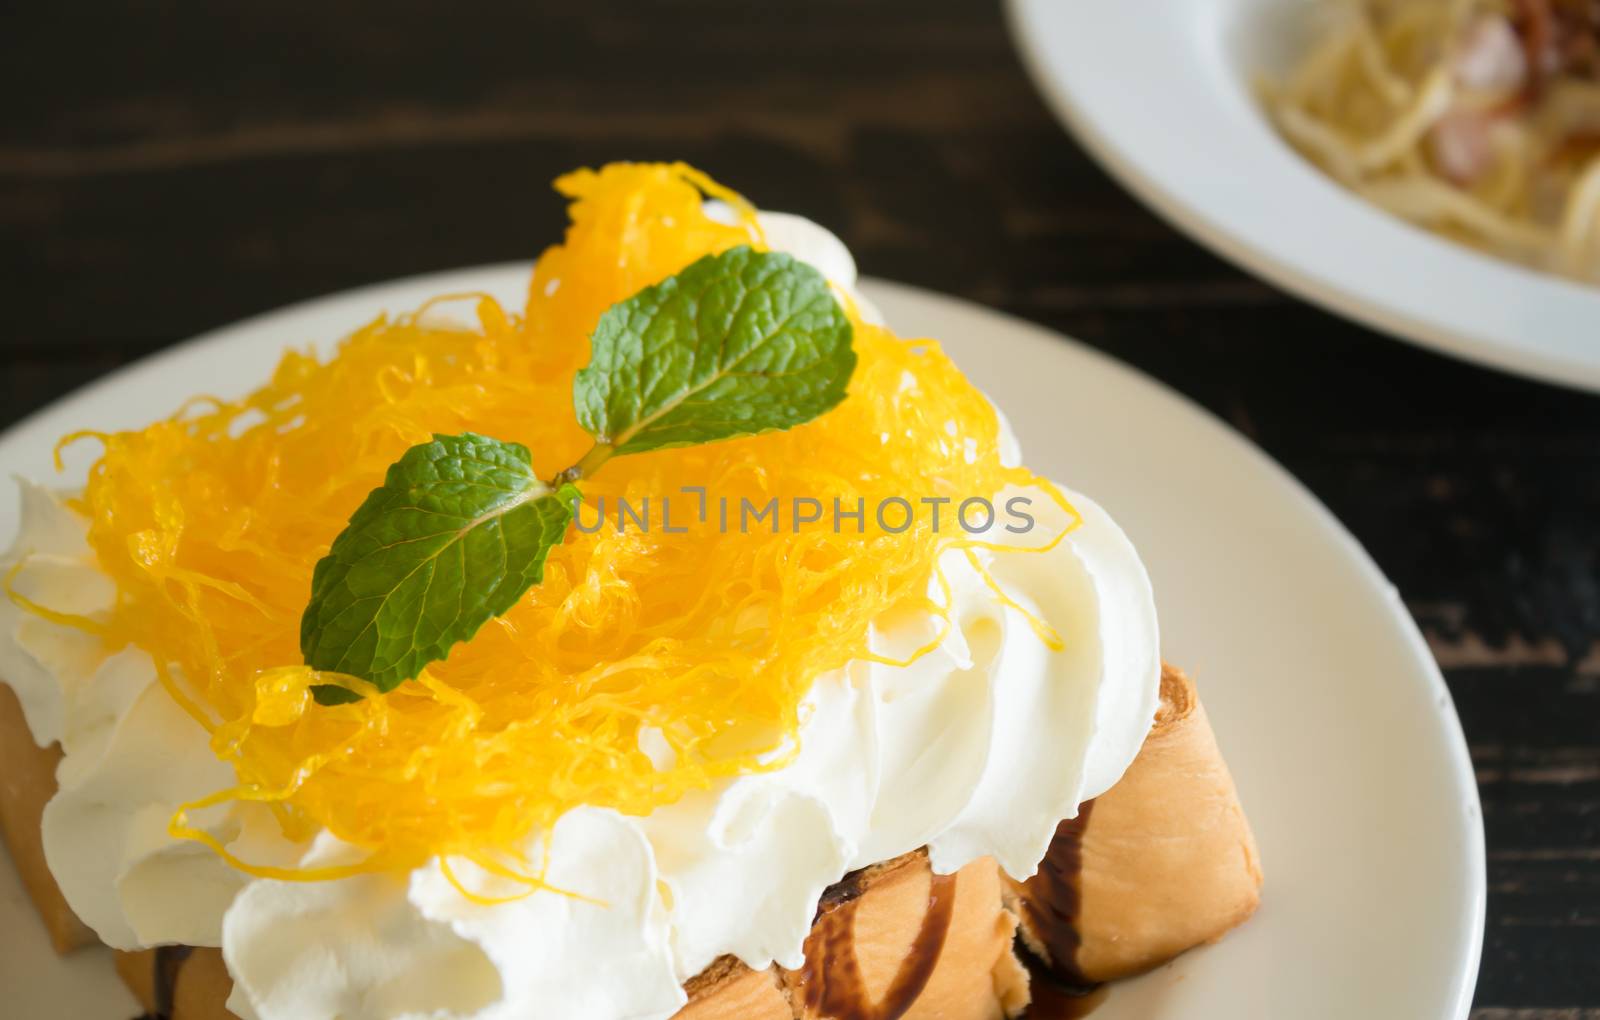 Golden Egg Yolk Threads or Foi Thong Toast and Whipped Cream and Chocolate. Thai dessert golden egg yolk threads or foi thong with peppermint on whipped cream on bread 
with chocolate sauce for food and drink category